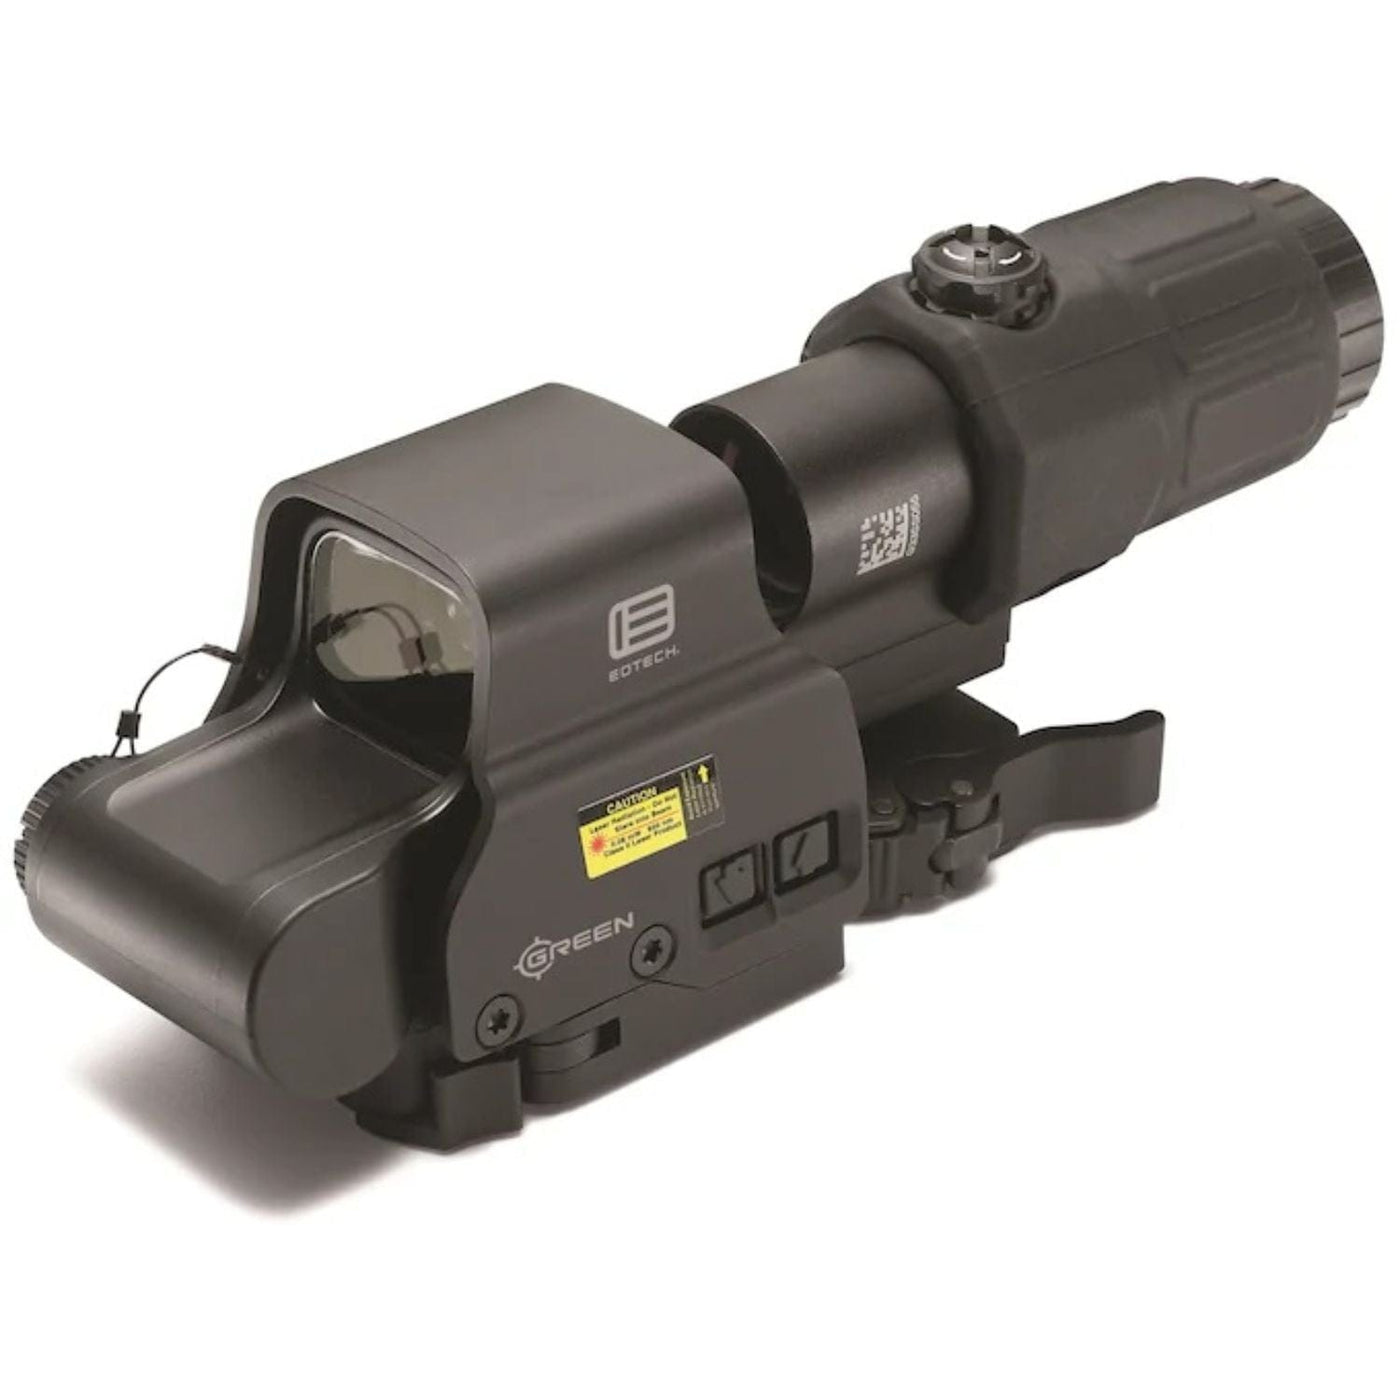 EOTECH EOTECH HHS-GRN Holographic Weapon Sight with Magnifier Optics And Sights